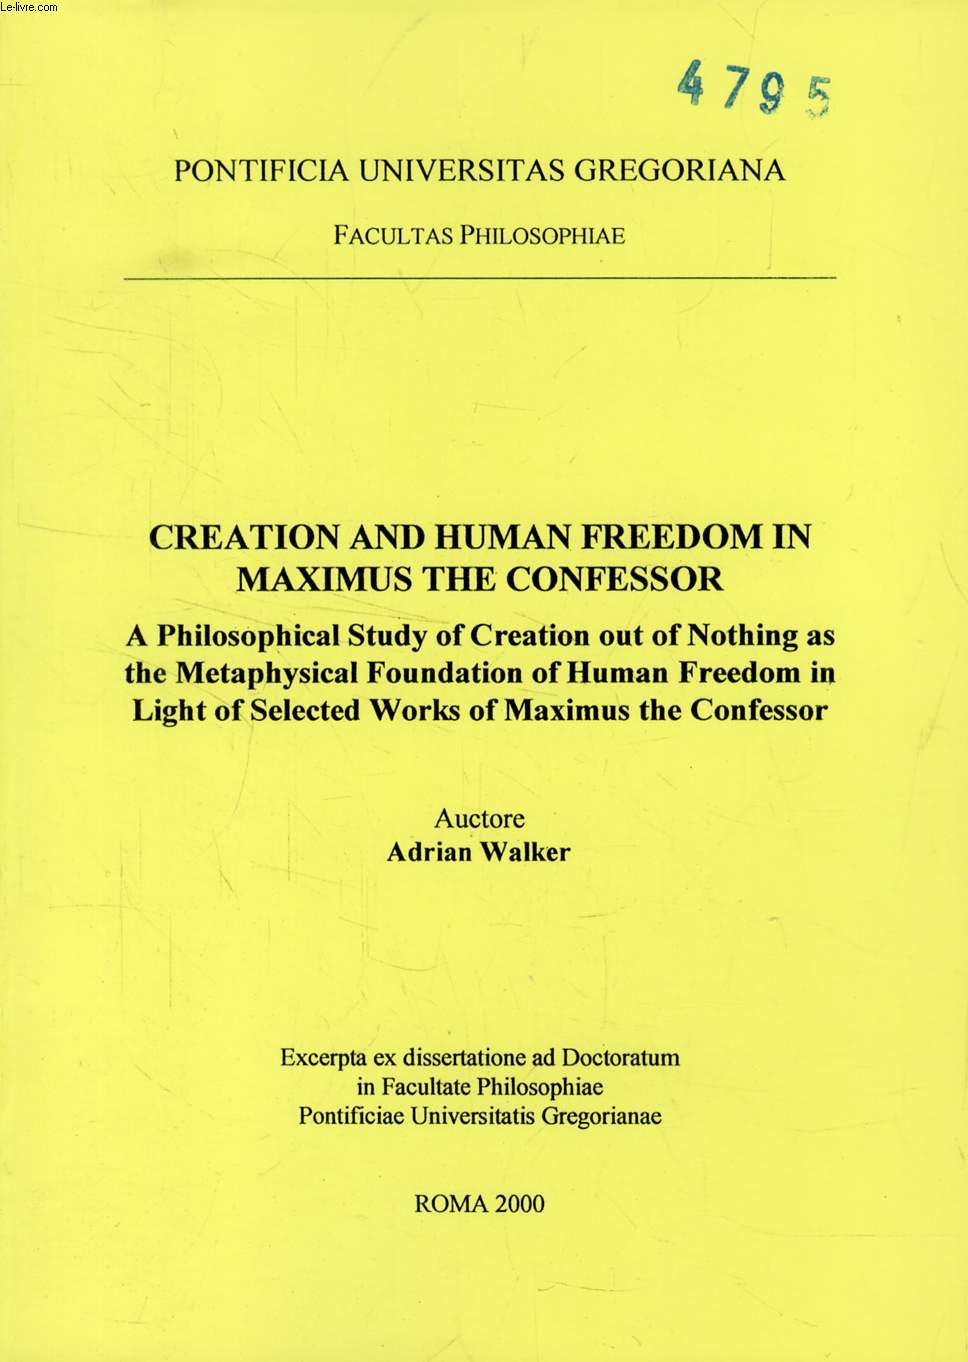 CREATION AND HUMAN FREEDOM IN MAXIMUS THE CONFESSOR, A PHILOSOPHICAL STUDY OF CREATION OUT OF NOTHING AS THE METAPHYSICAL FOUNDATION OF HUMAN FREEDOM IN LIGHT OF SELECTED WORKS OF MAXIMUS THE CONFESSOR (EXCERPTA EX DISSERTATIONE)